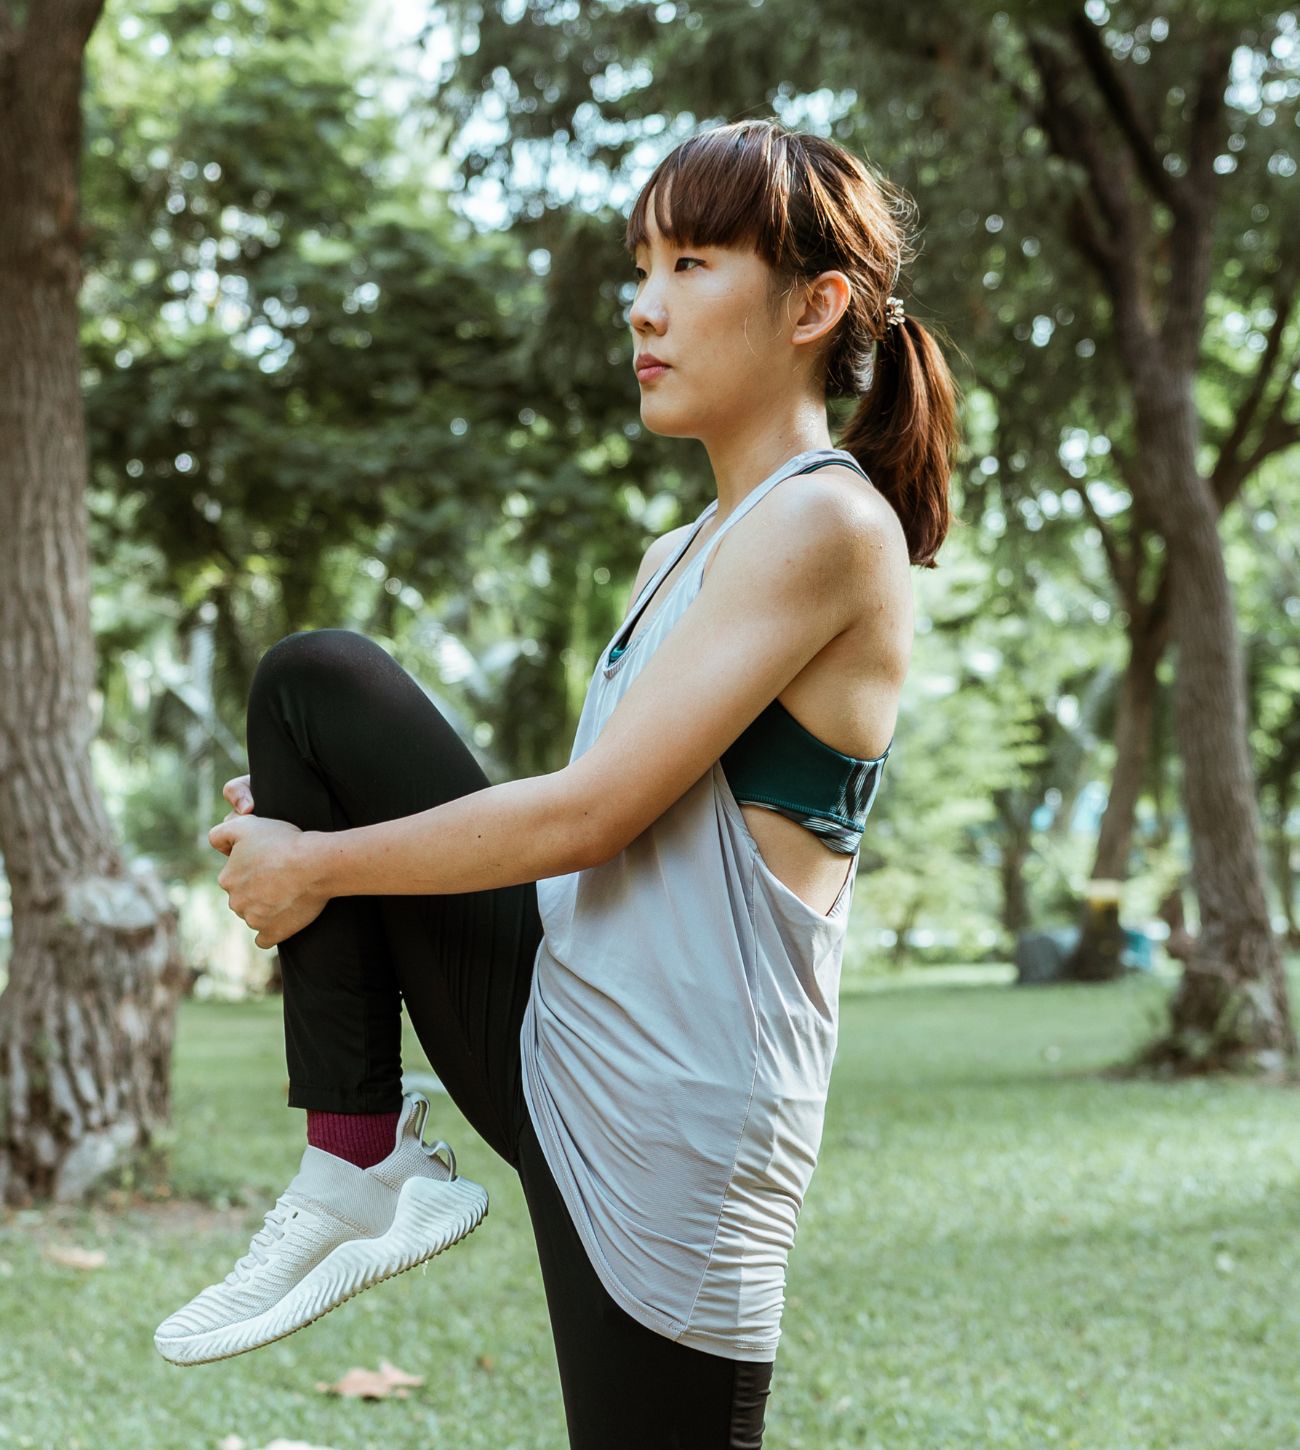 Photo of a young woman stretching in the park.